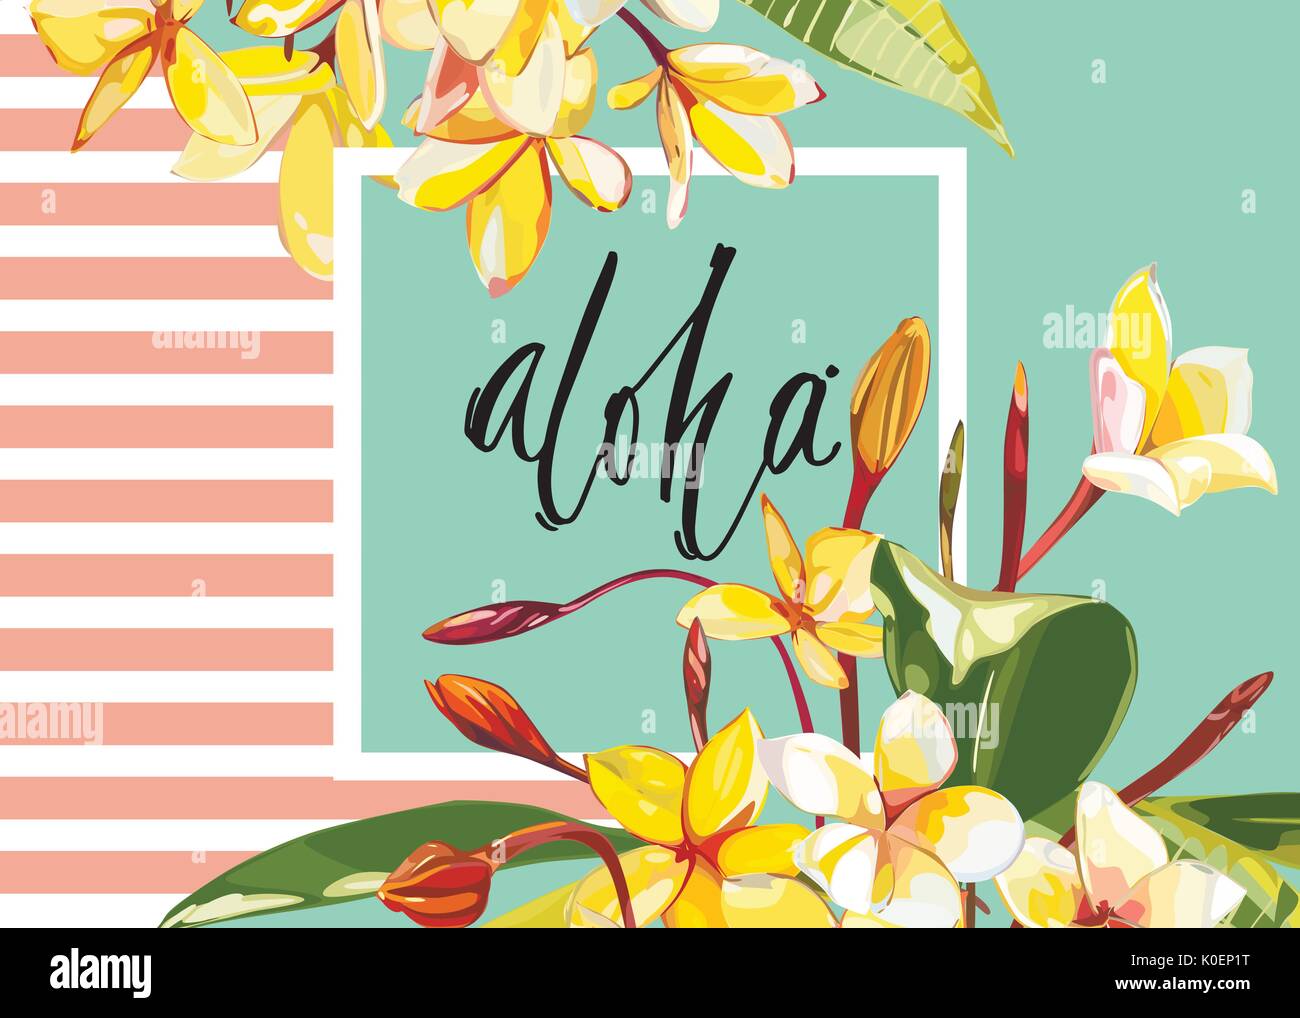 Floral frame with Plumeria flowers on light background. Greeting card or template for wedding's Day design. Word- Aloha. EPS 10 Stock Vector